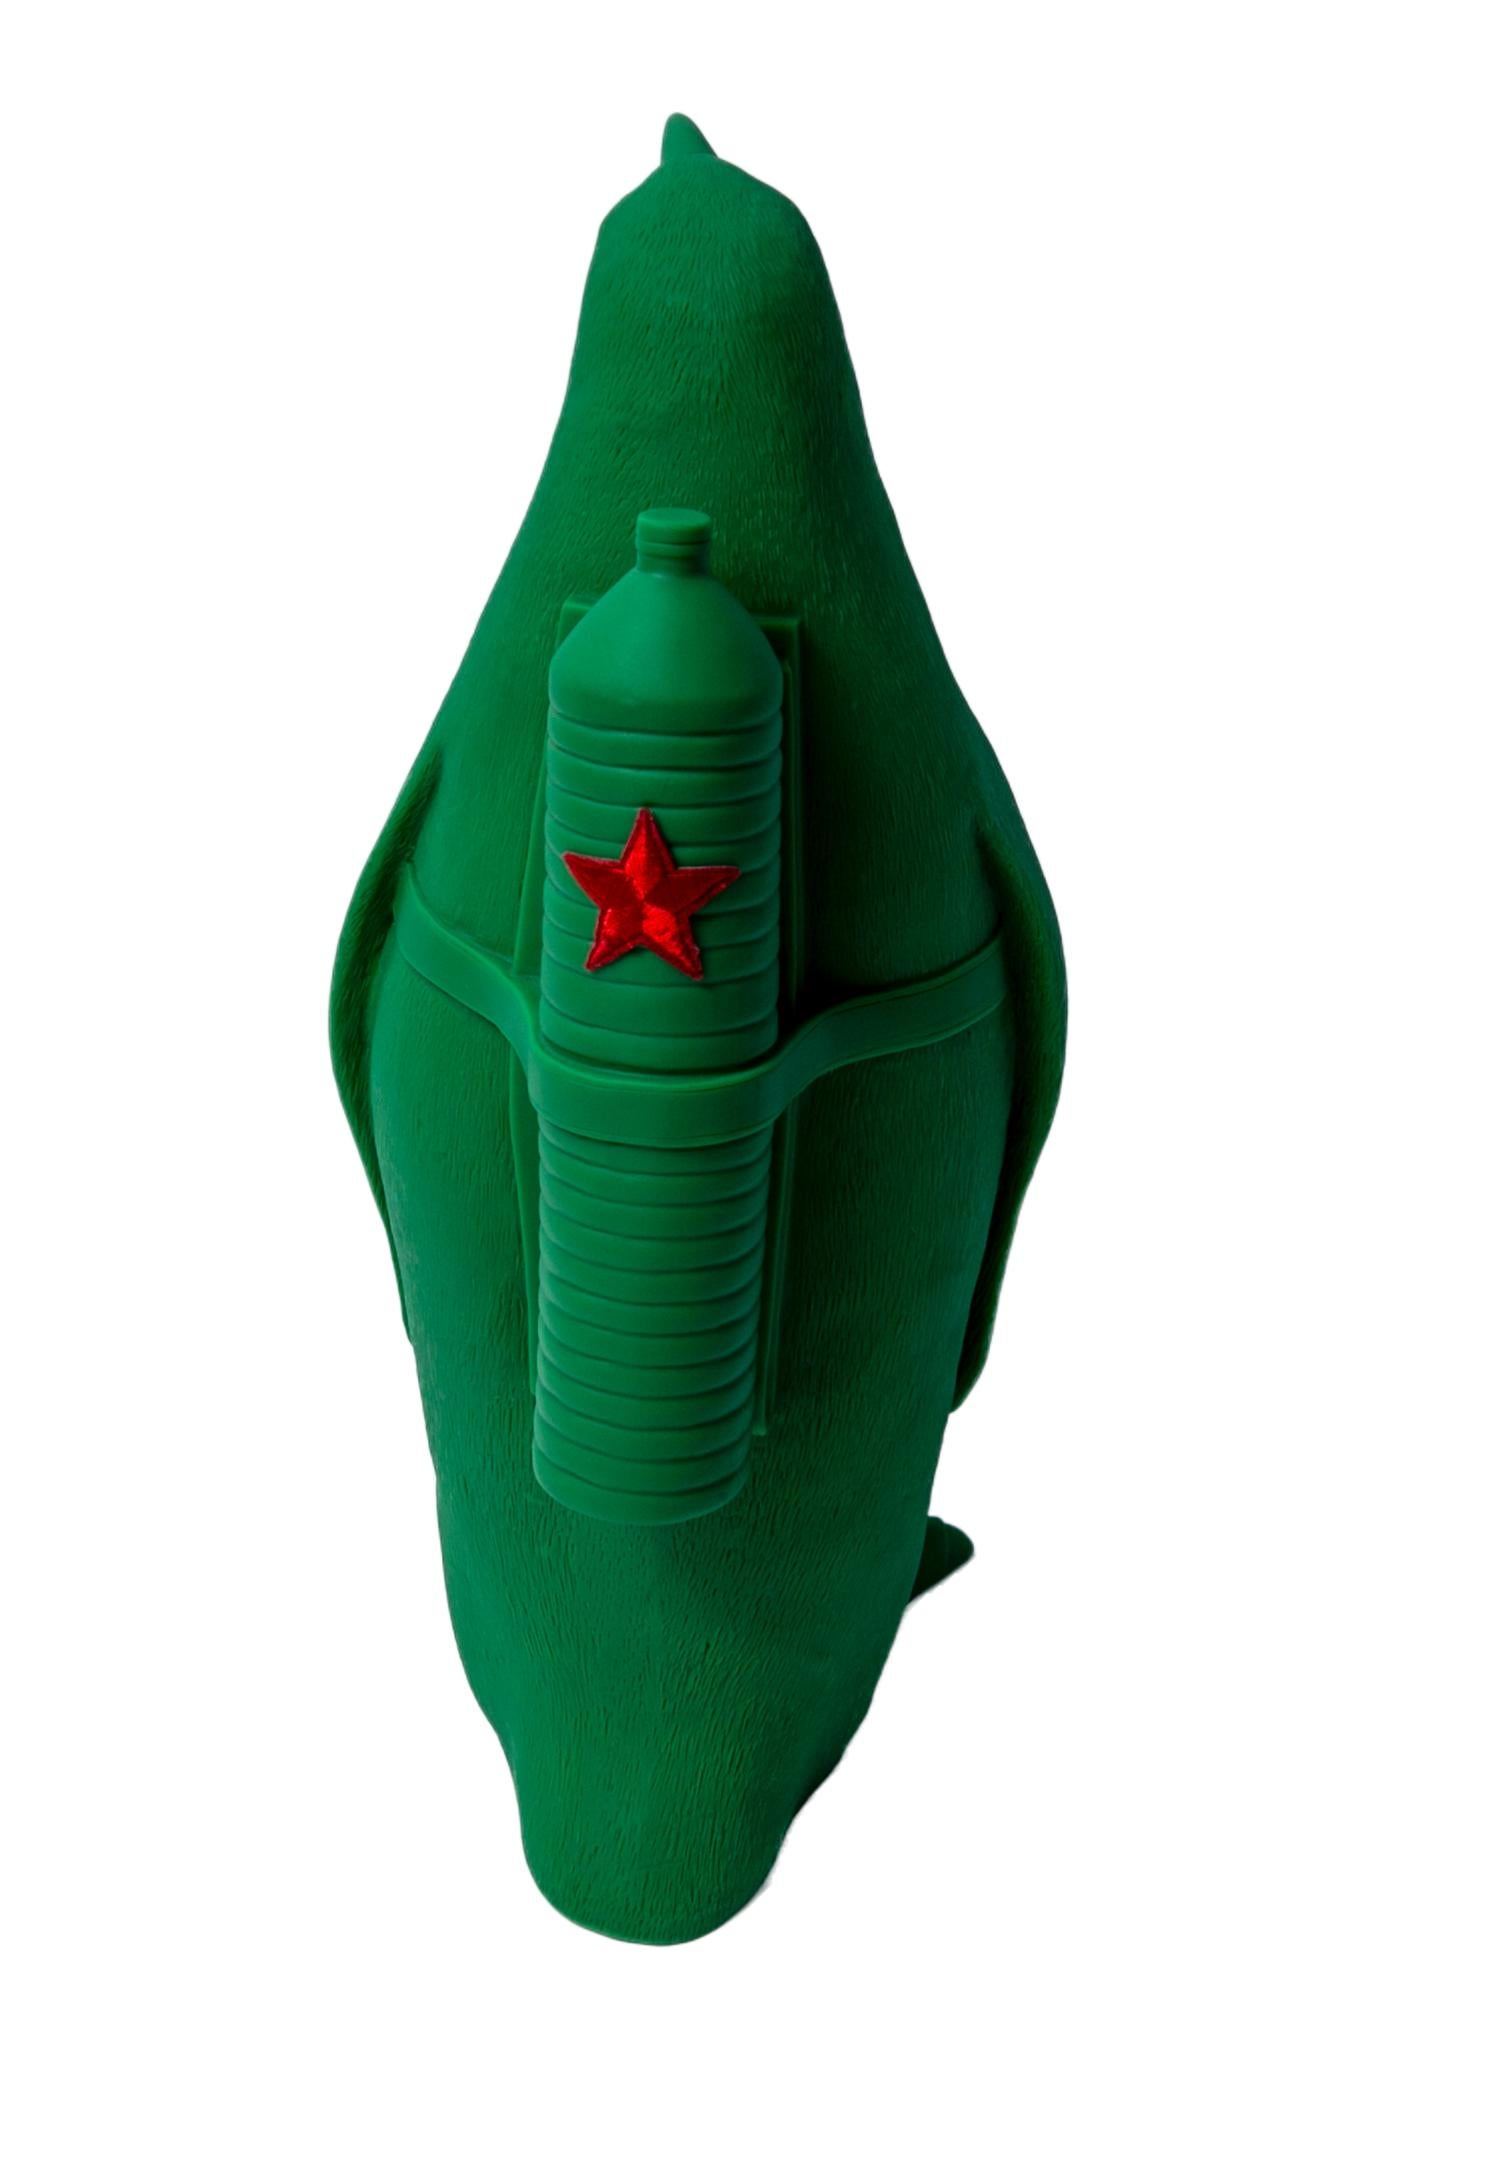 Small Cloned Green Penguin with Water Bottle, Cuban Edition - Sculpture by William Sweetlove